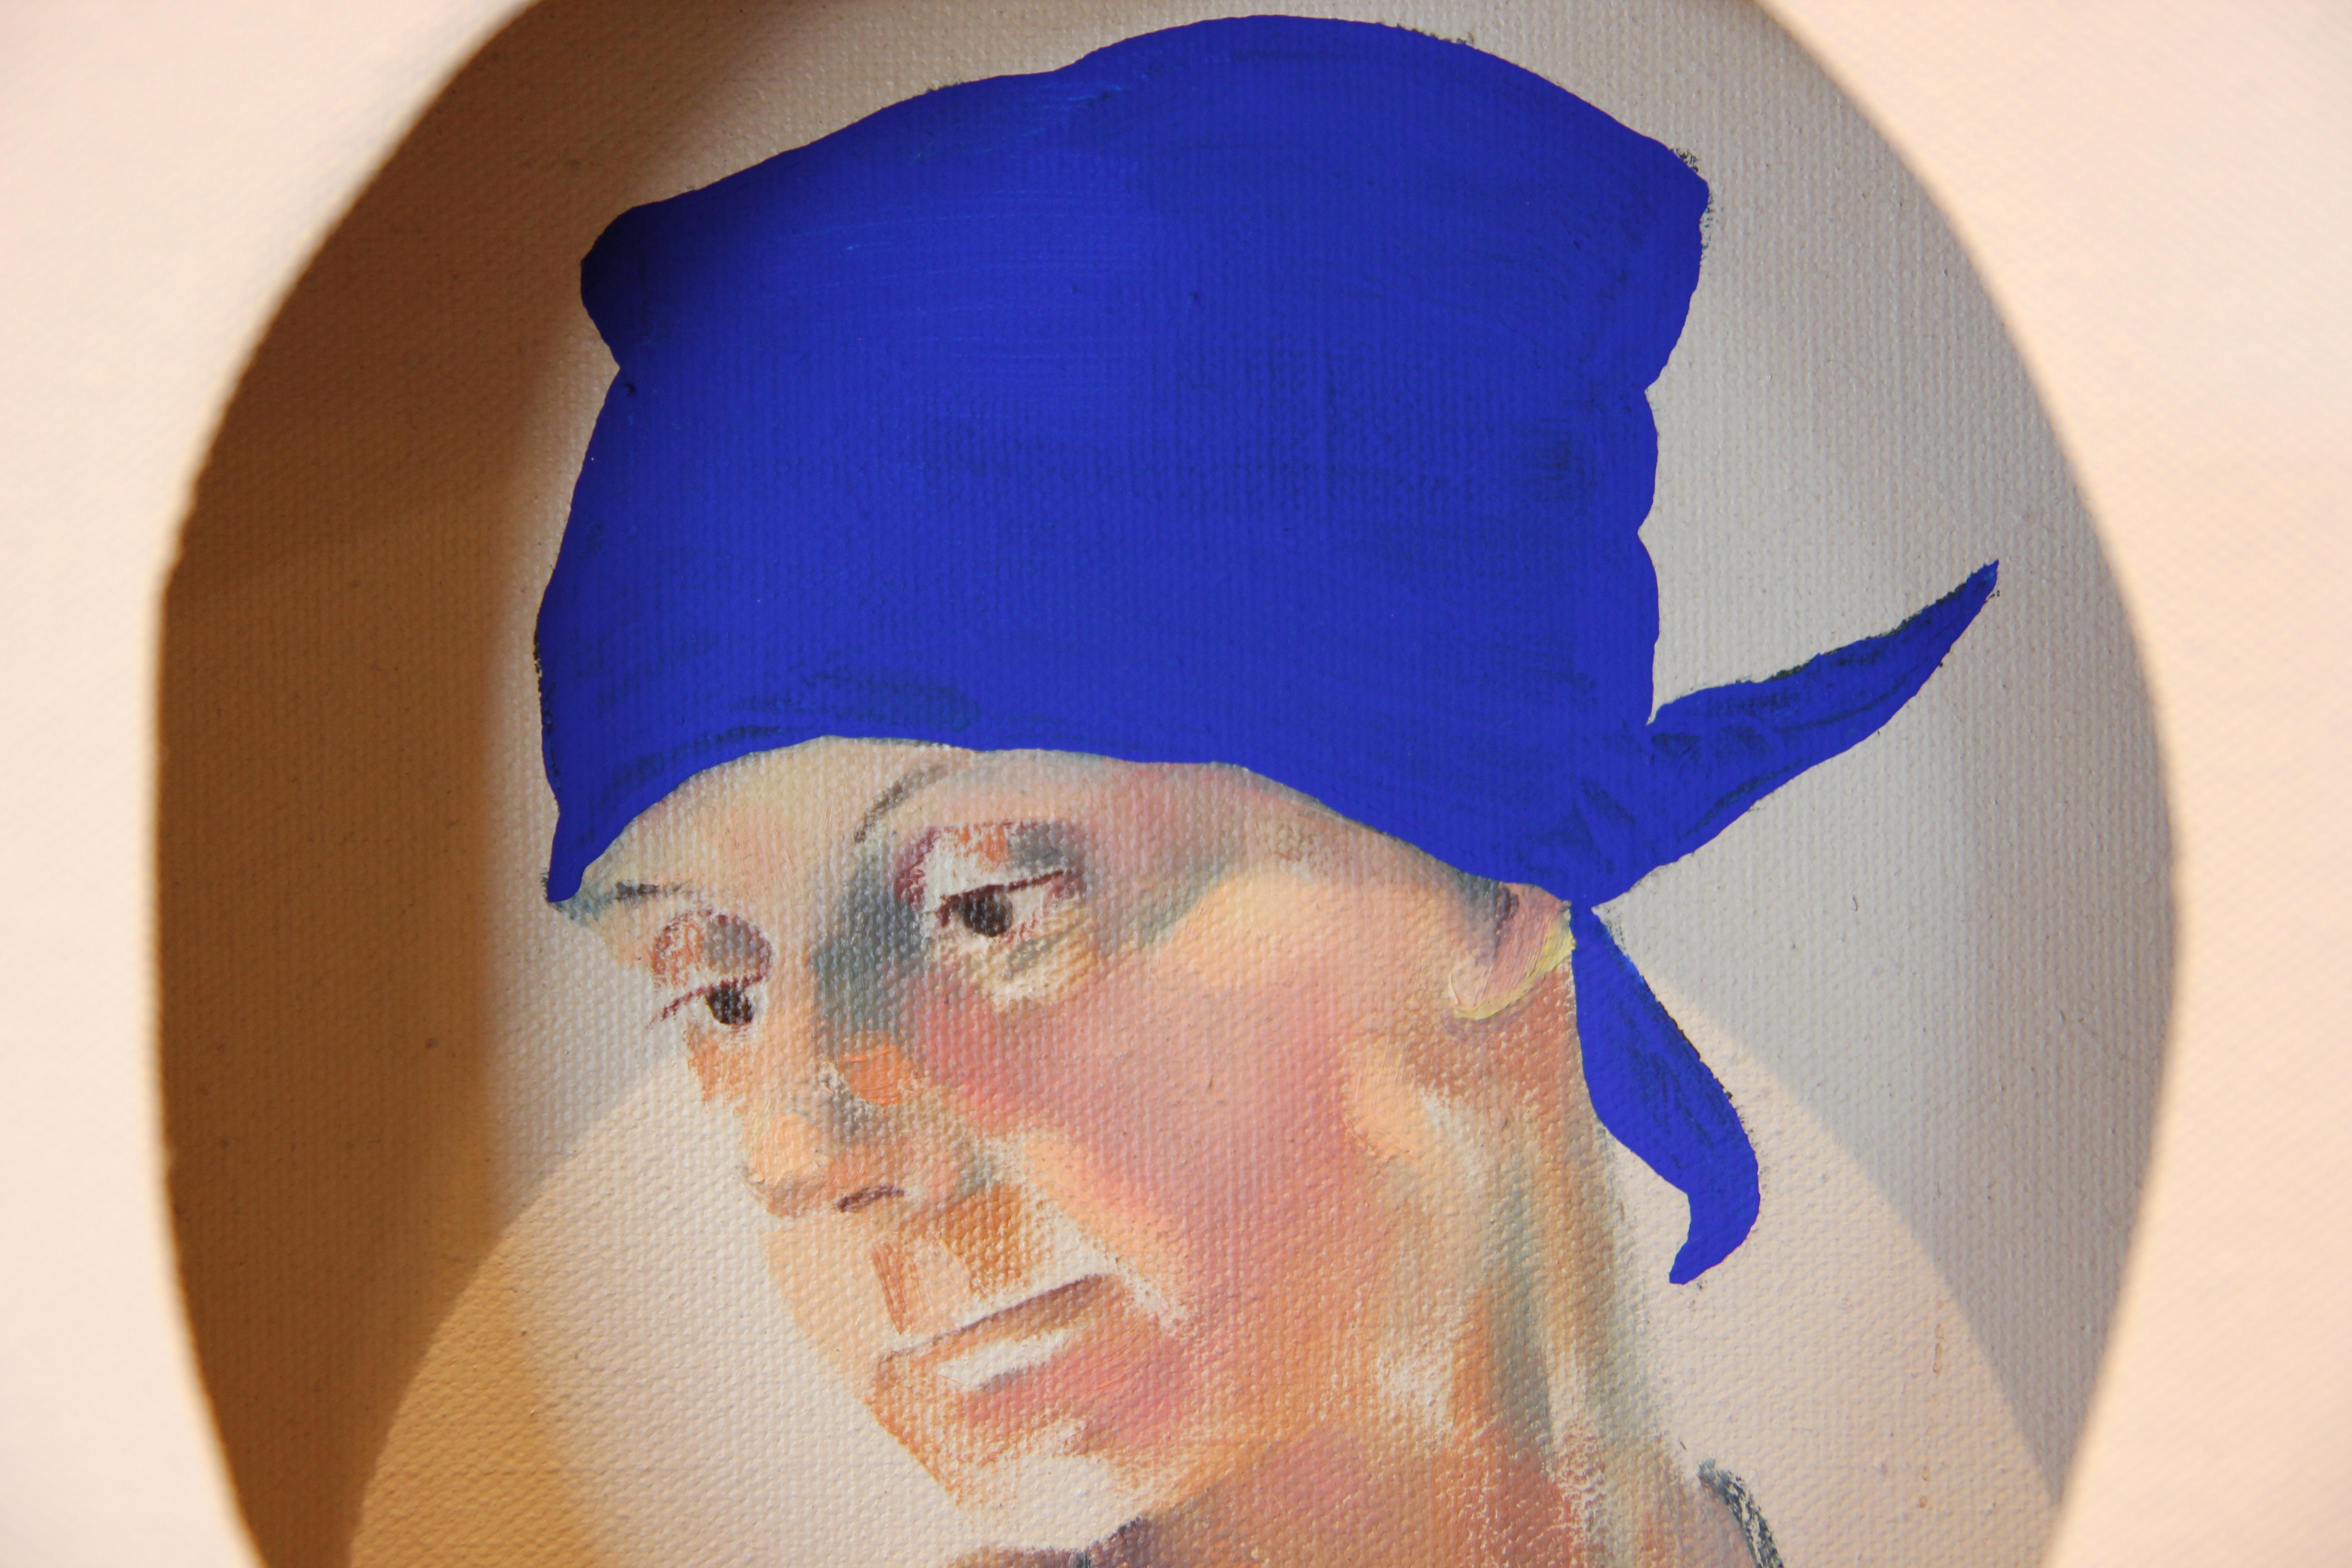 Three dimensional conceptual painting by Matthew Reeves. White painted canvas stretched over a framed painting of a woman with bright blue handkerchief. The artist Matthew Reeves, owner of Reeves Design + Art, painted the canvas with white and